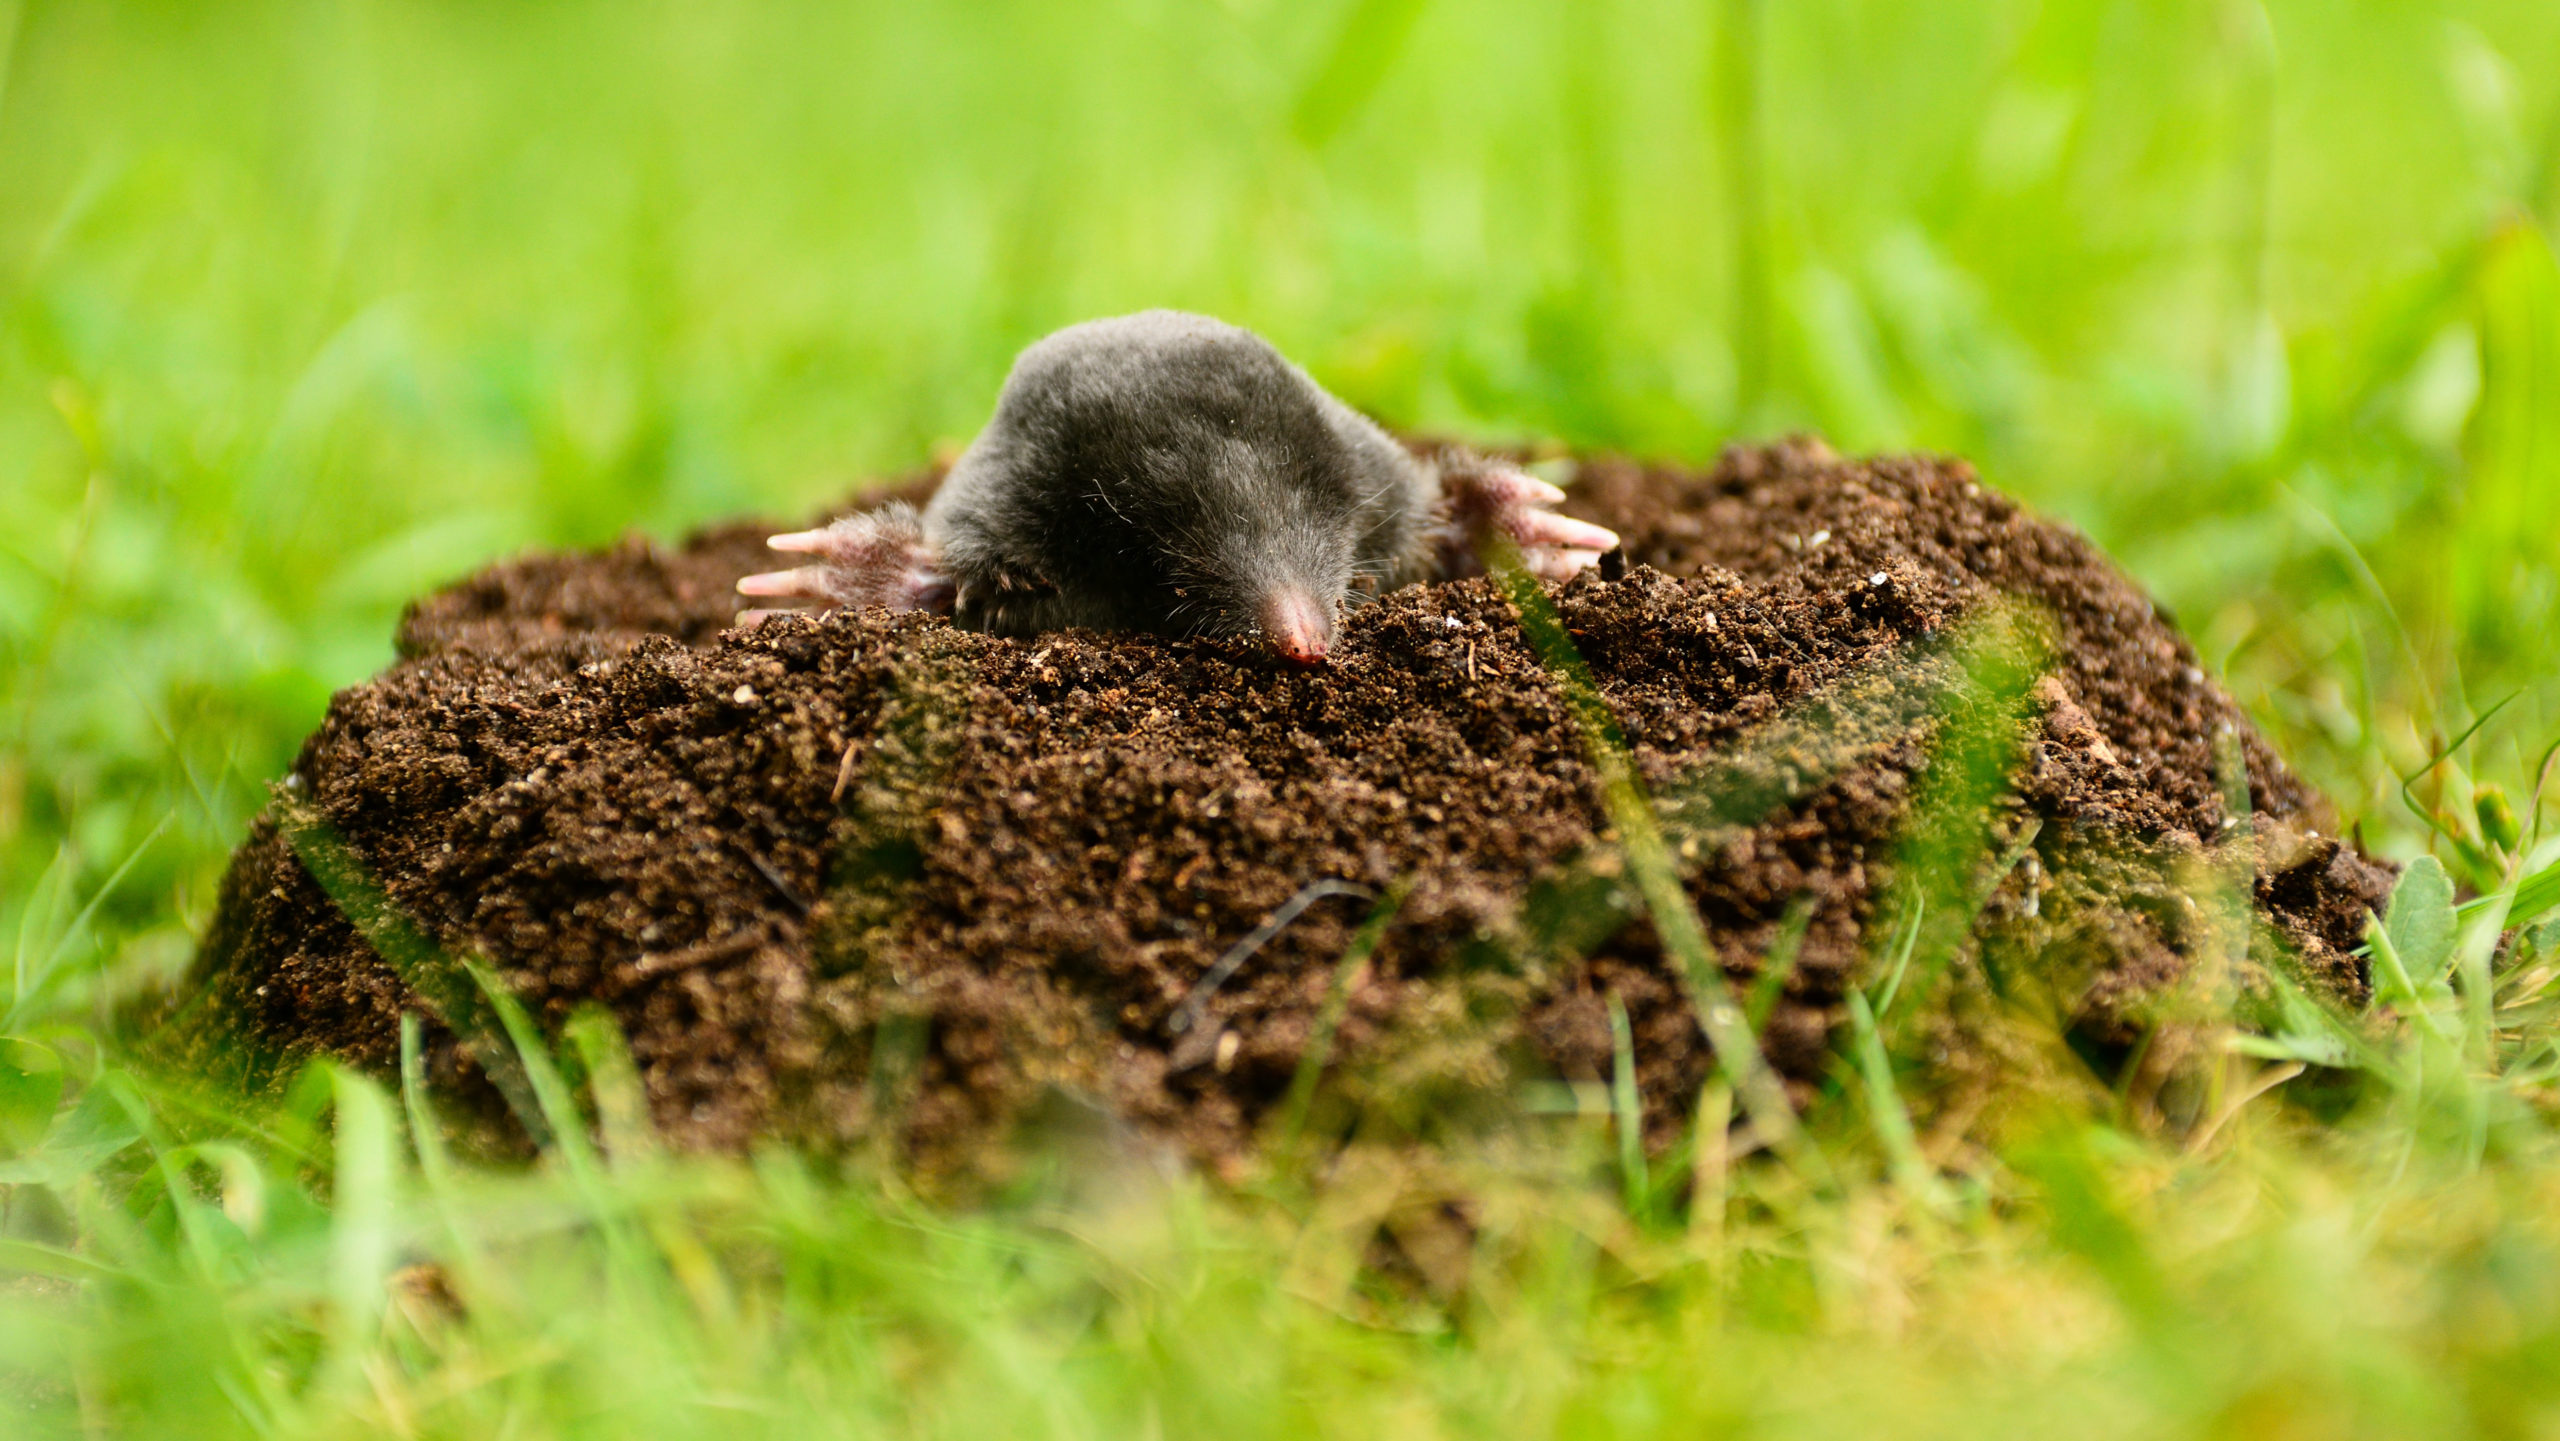 a mole sticking its head out of a mole hill in a field